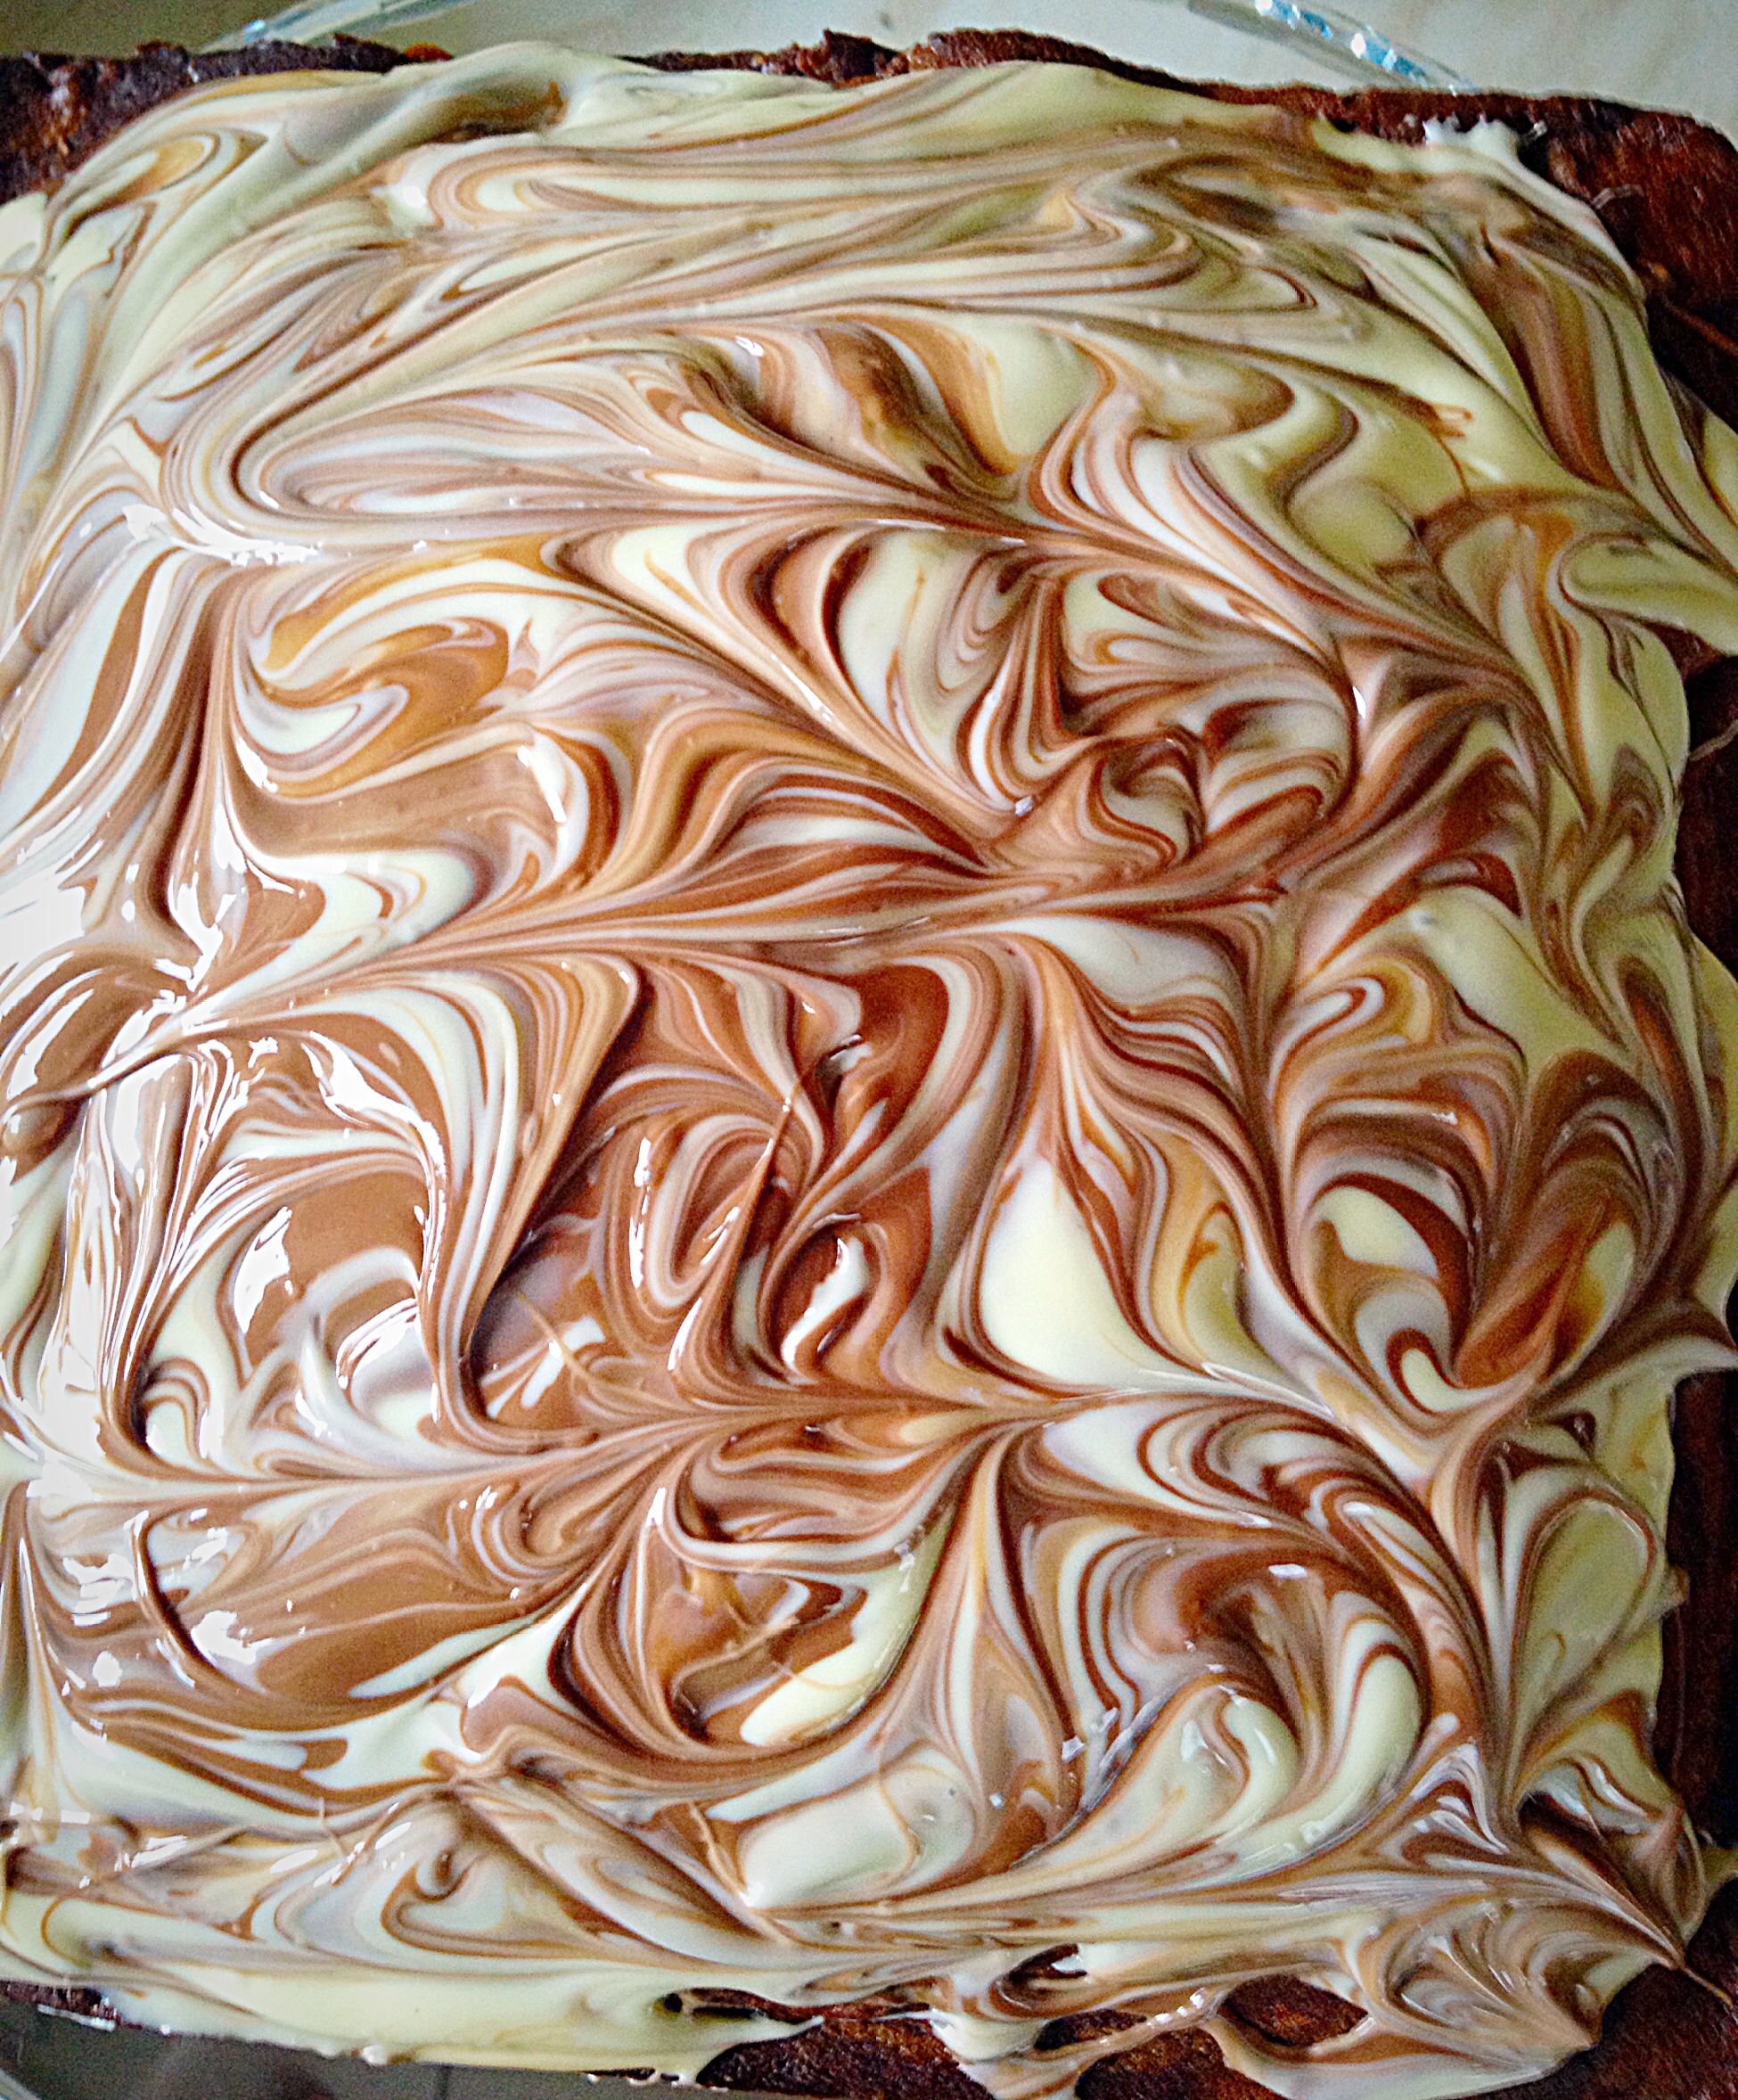 Malted Marbled Chocolate Cake - Feasting Is Fun